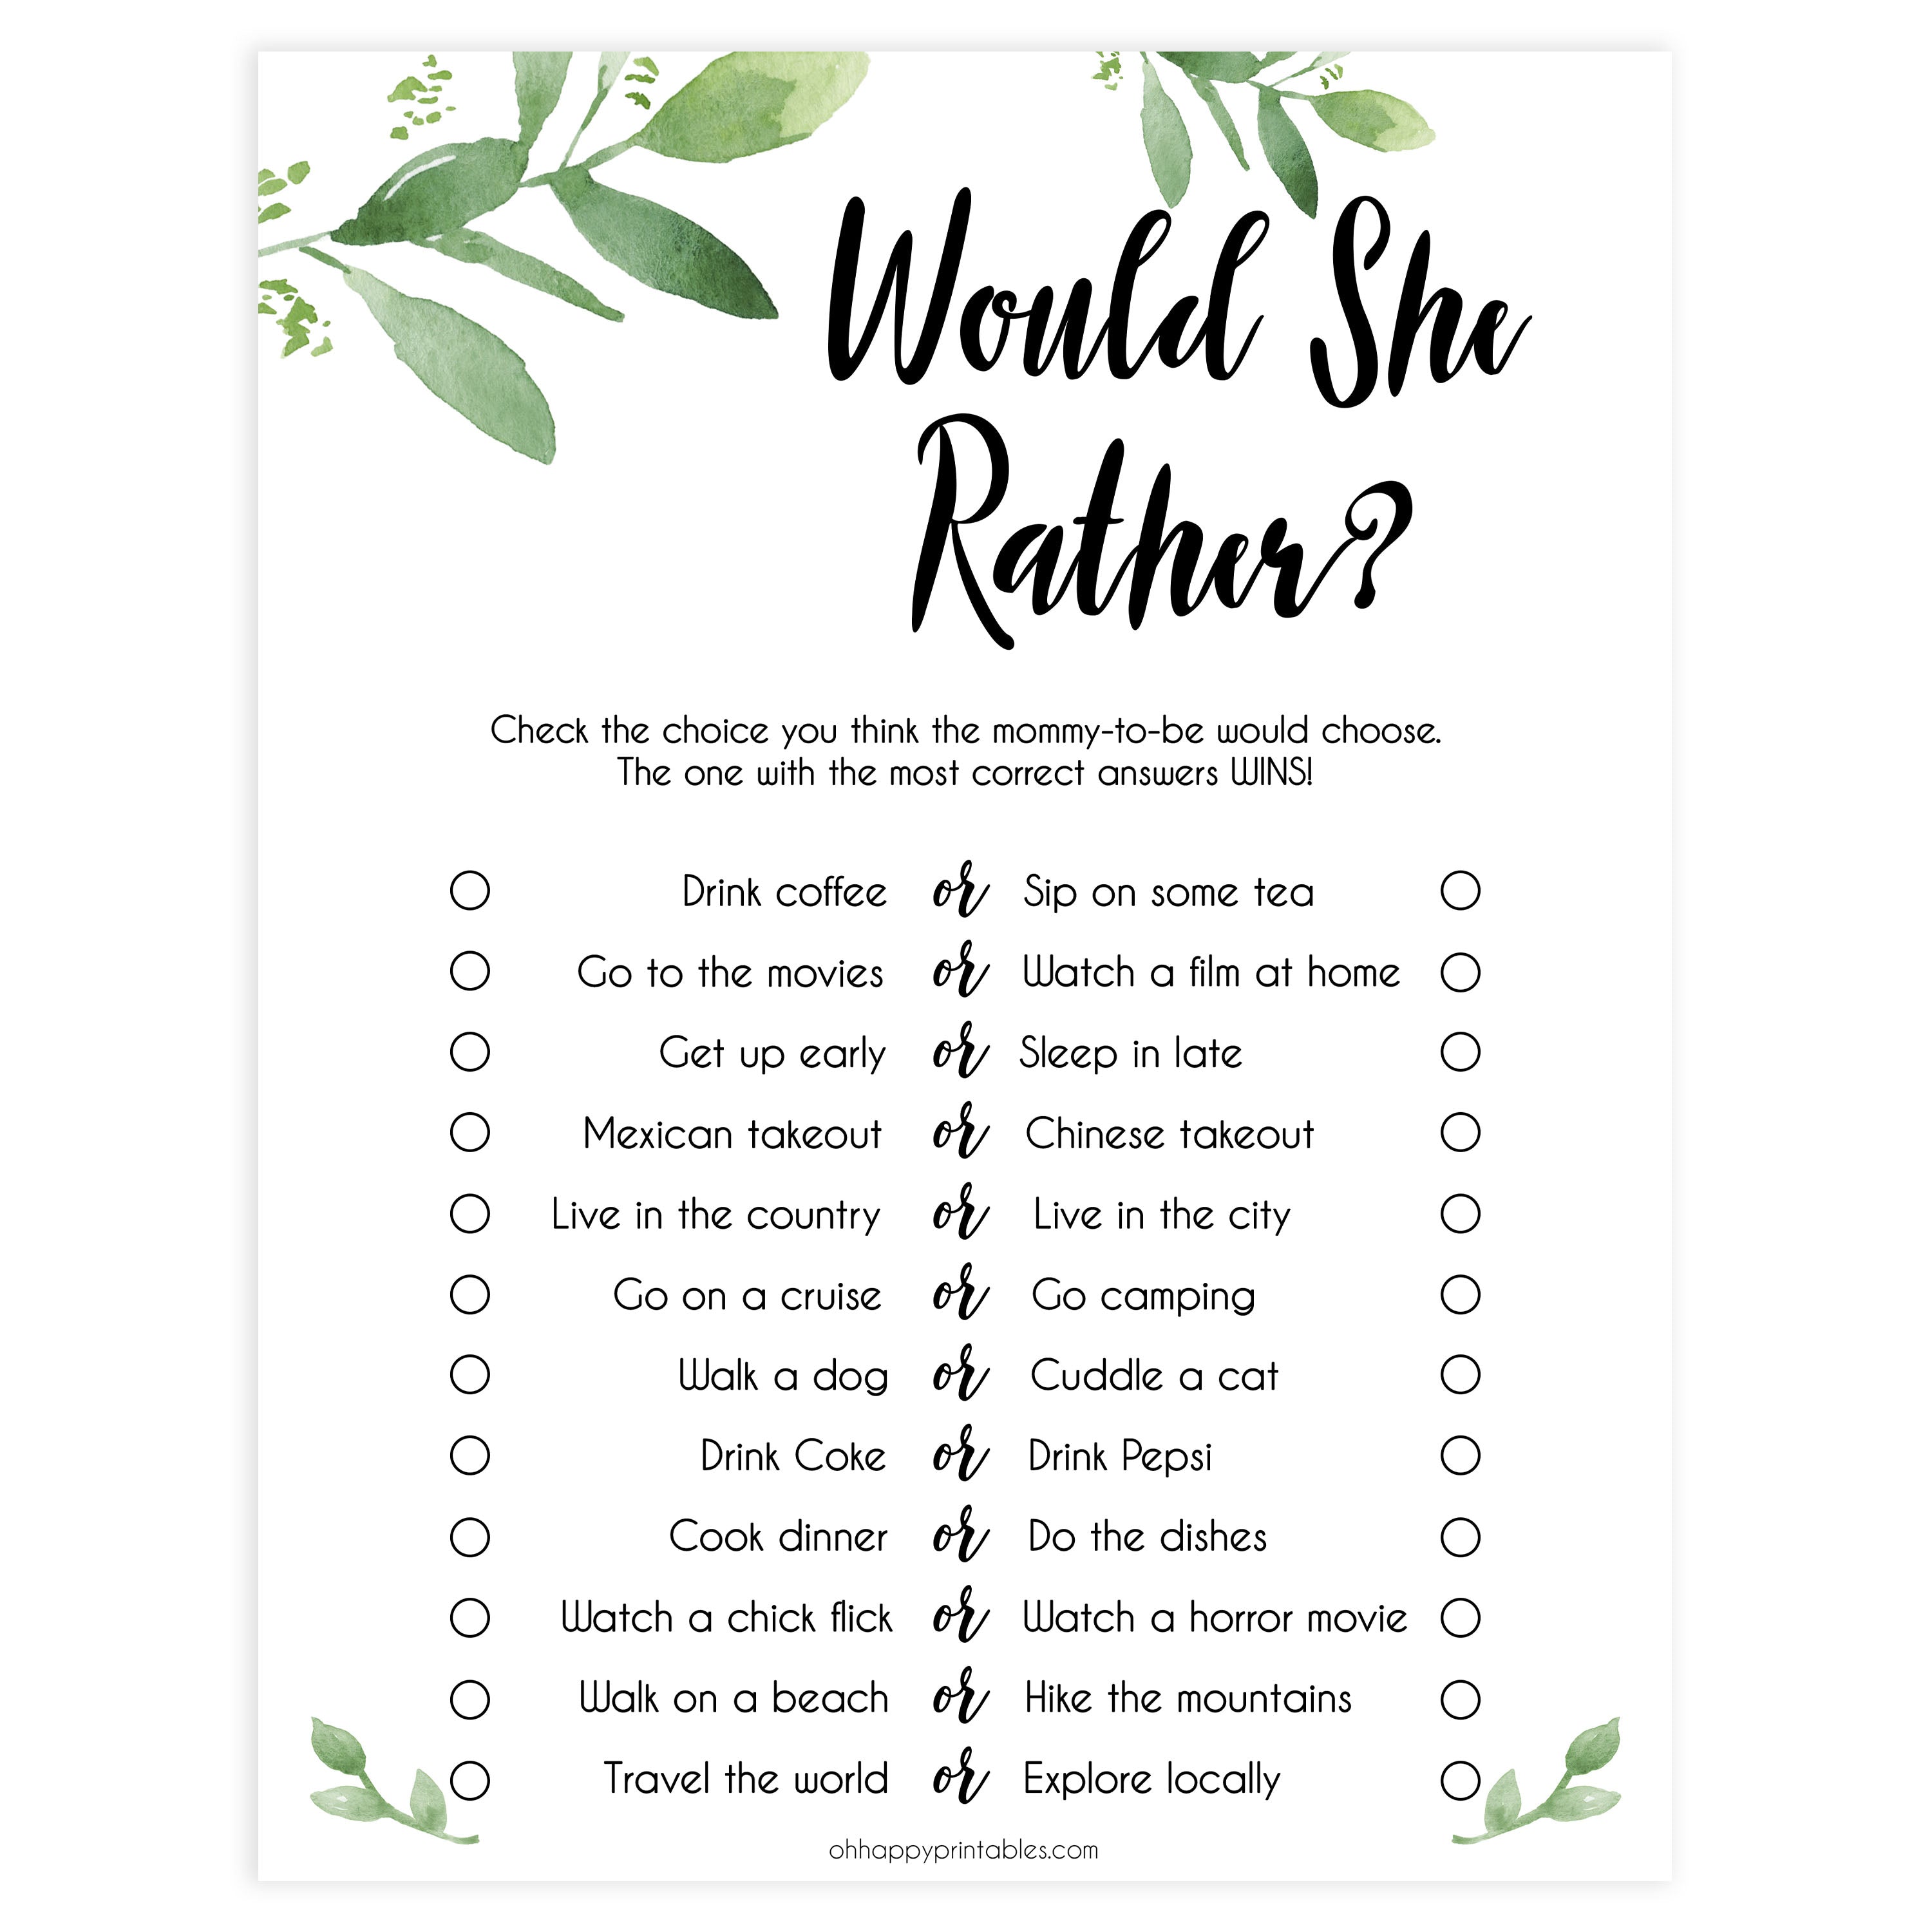 would she rather baby game, baby would she rather, Printable baby shower games, botanical baby shower games, floral baby shower ideas, fun baby shower ideas